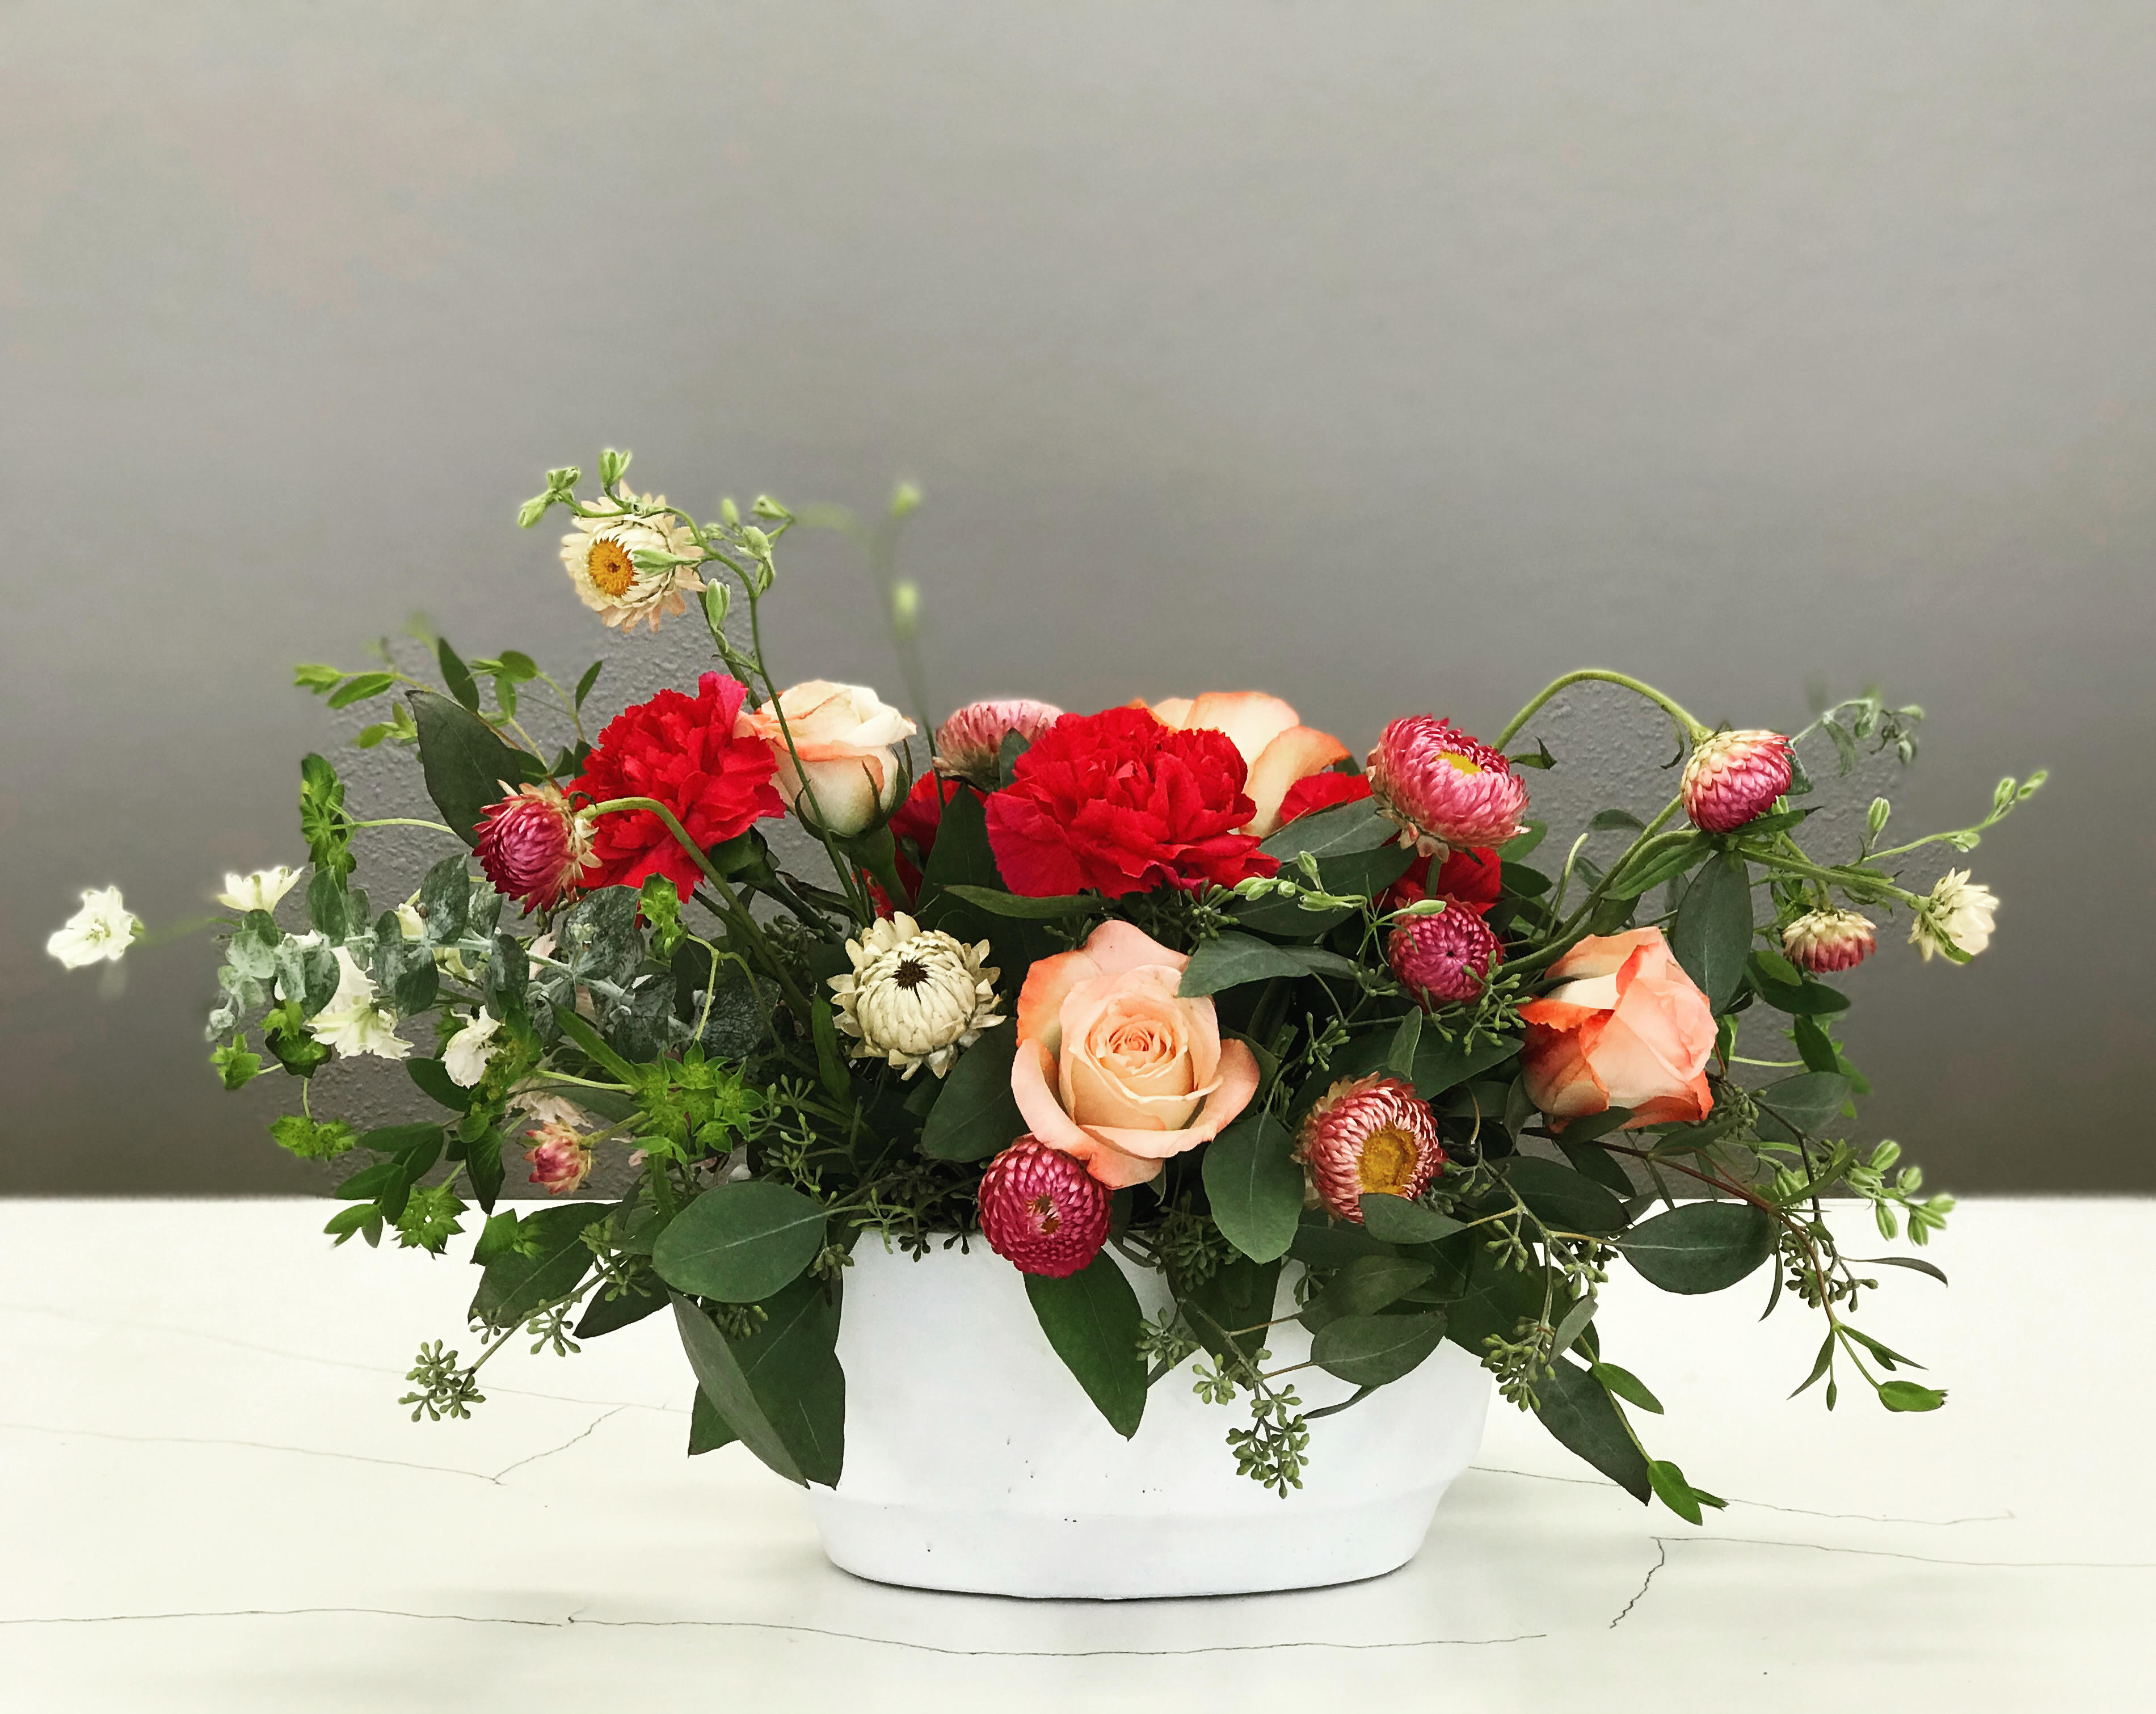 Strawberry Fields Forever - Playful red tones and strawflowers give some whismy to romance.